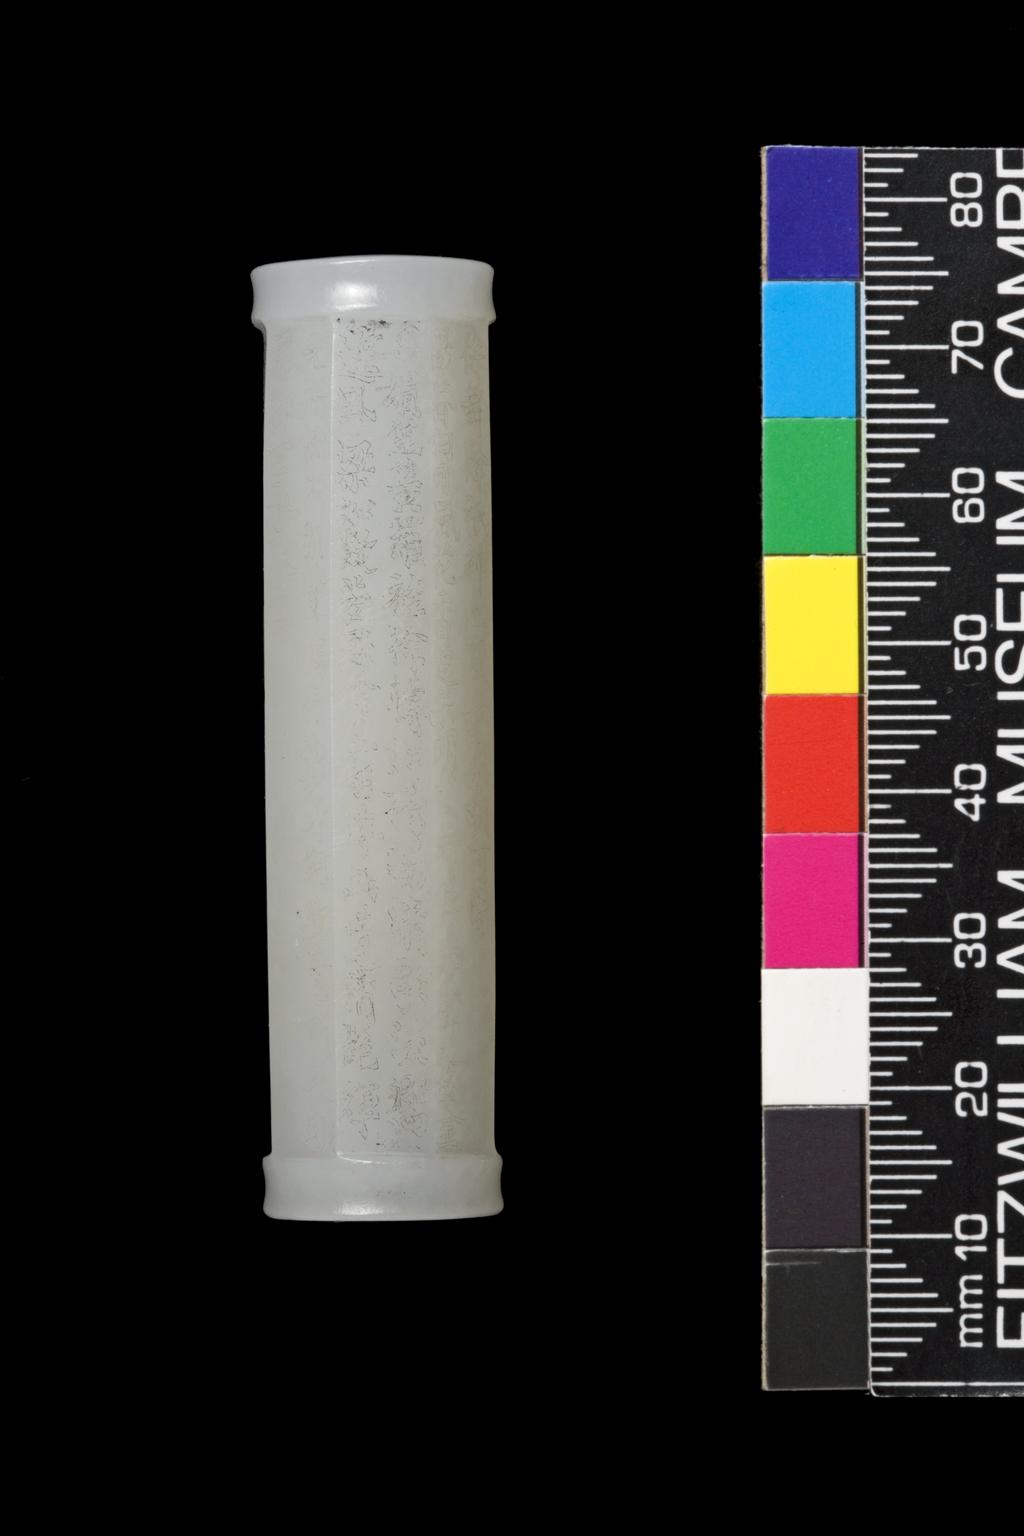 An image of Bead, tubular shape. White jade, eight sided tubular bead with very fine inscriptions on each side of the Cong, tube. Nephrite, height 6.2 cm, diameter 1.6 cm, 1850-1900. Chinese.